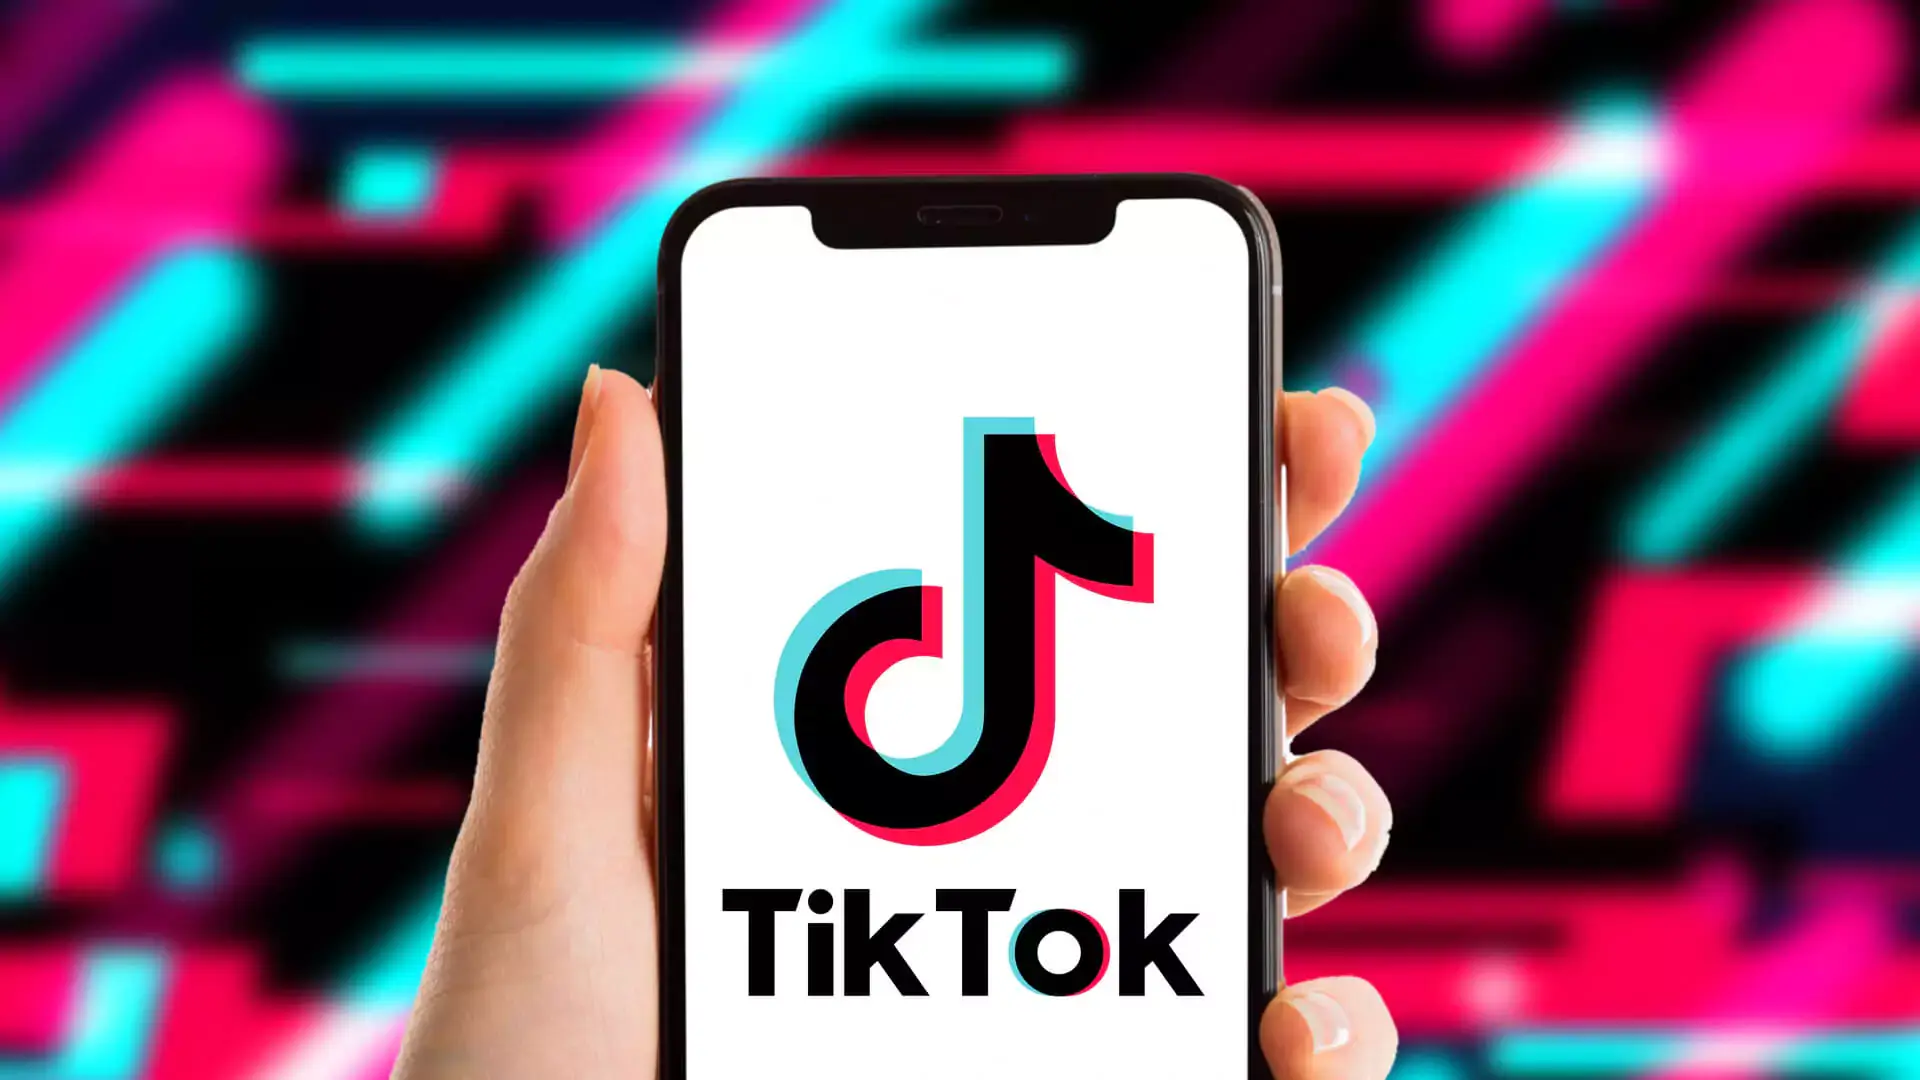 TikTok is among the most preferred video platforms